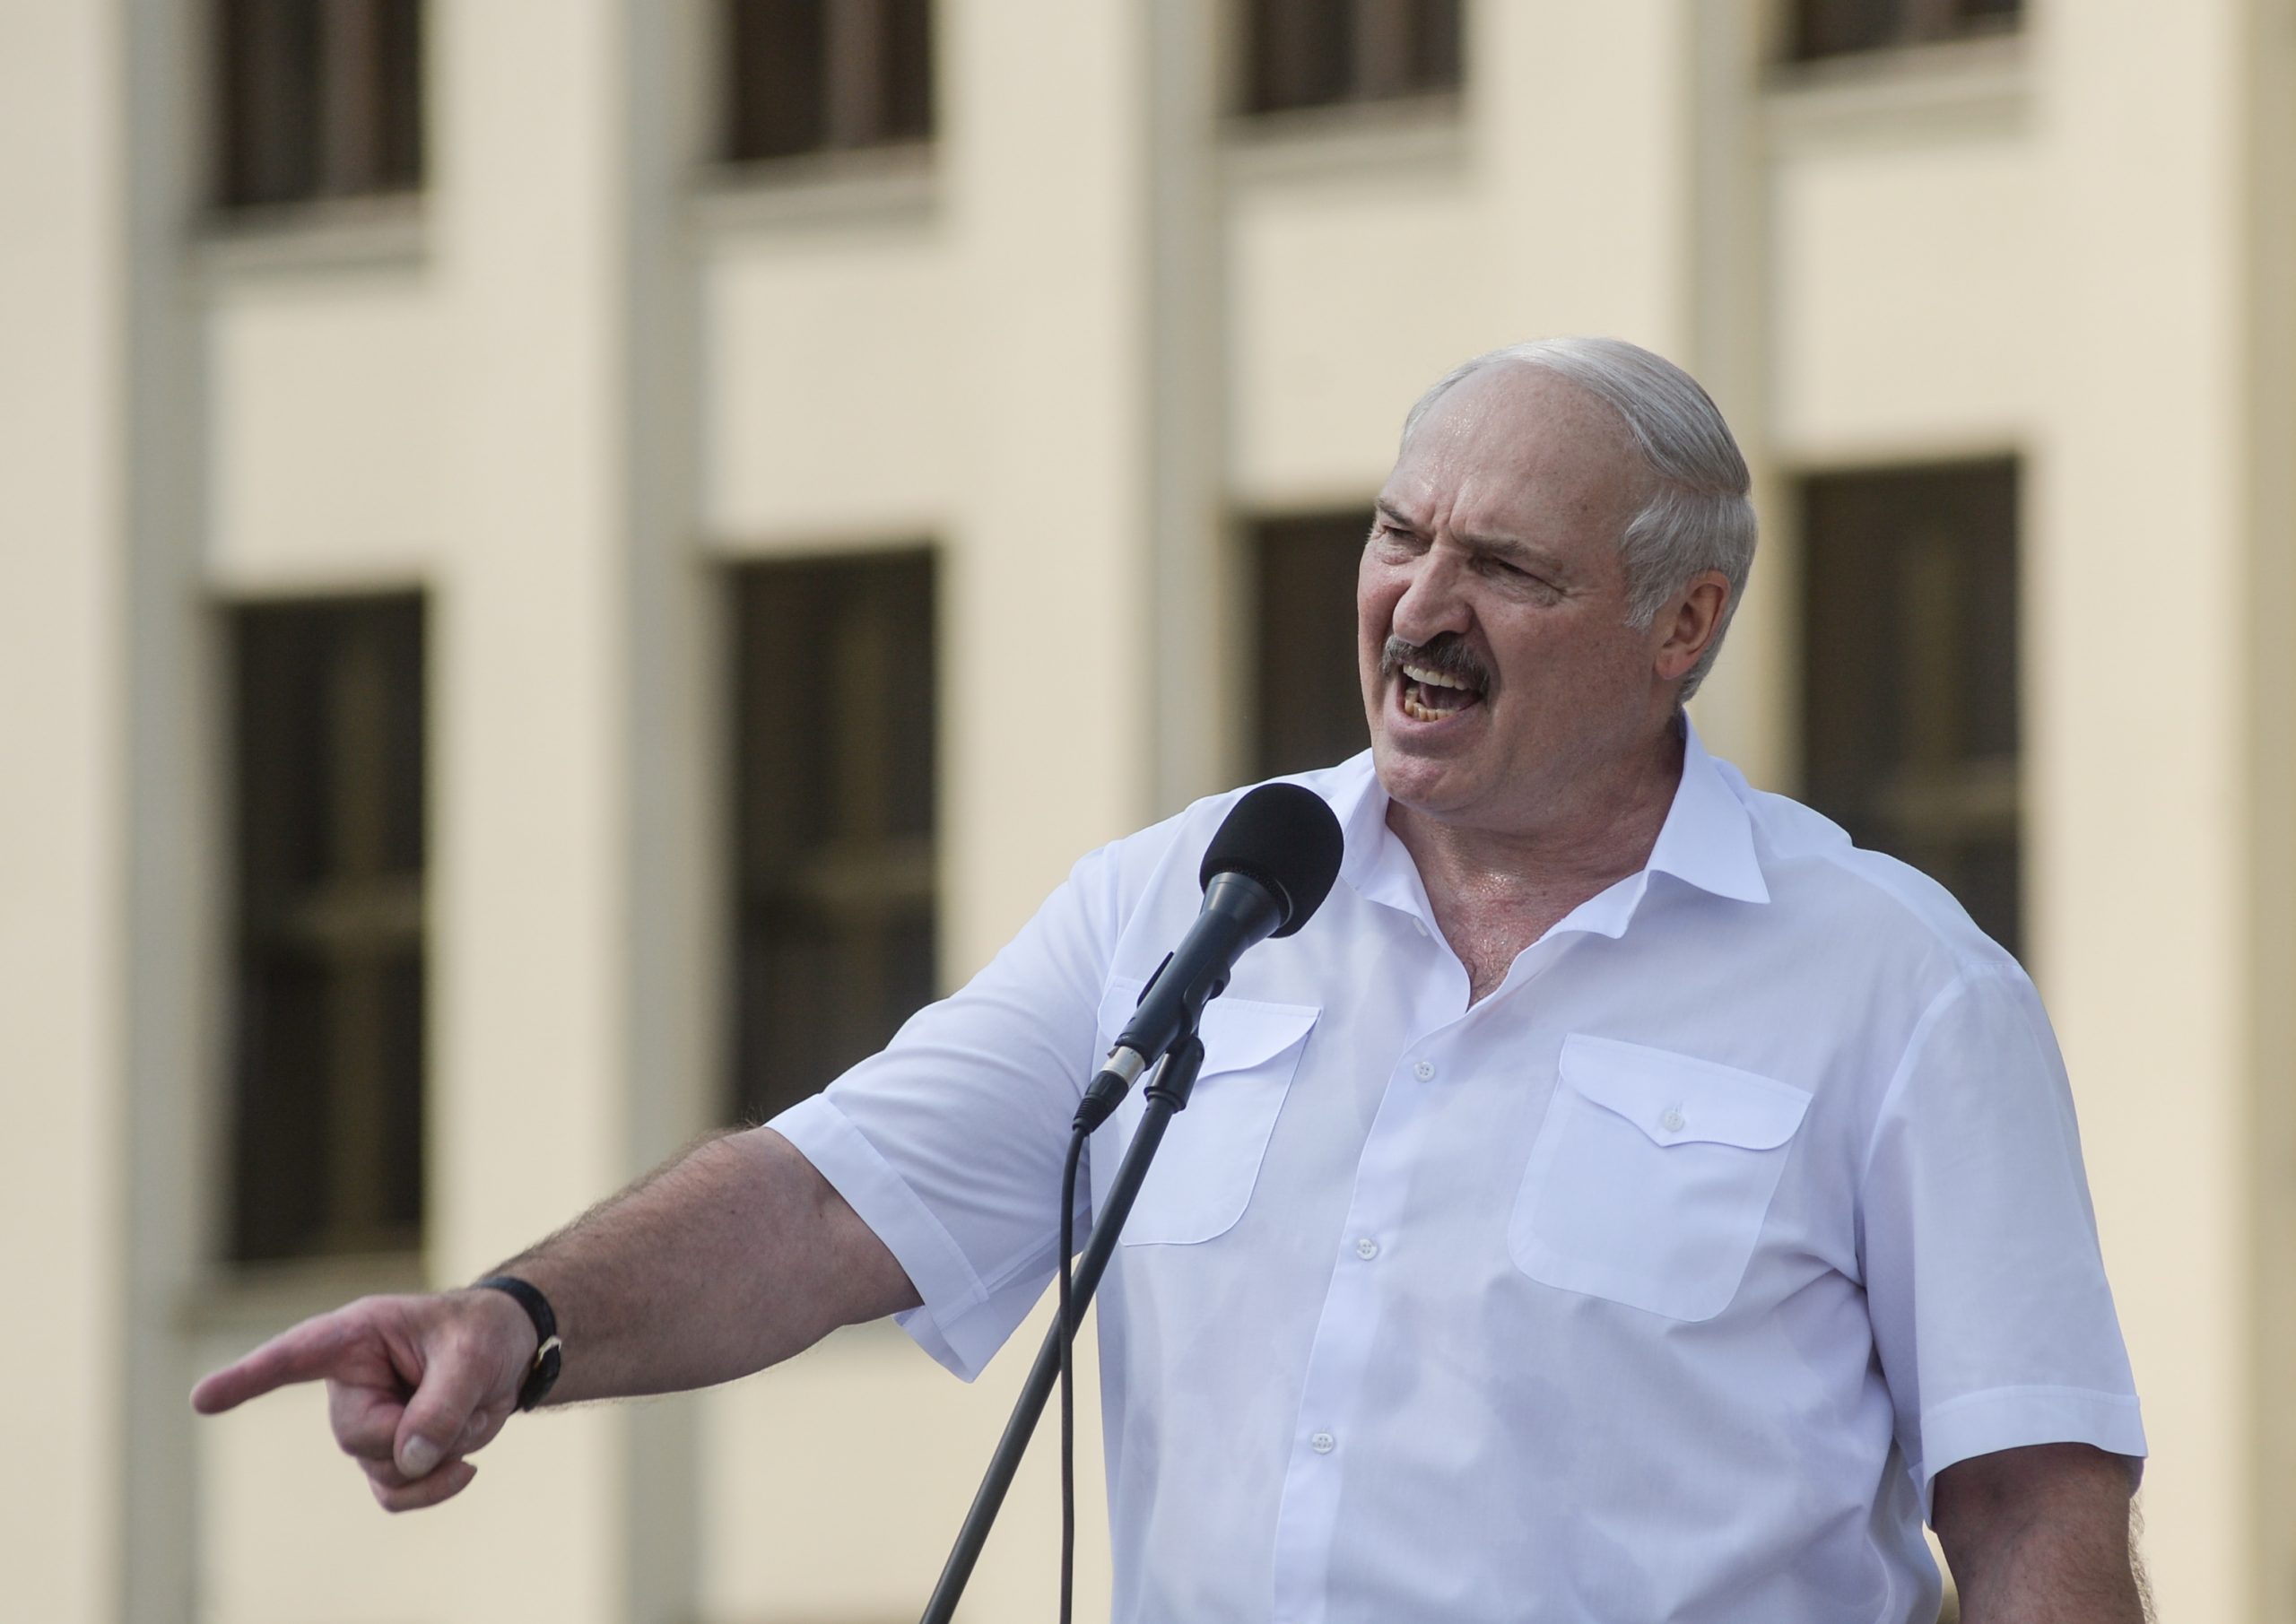 epa08606966 Belarusian President Alexander Lukashenko addresses his supporters during a rally in Minsk, Belarus, 16 August 2020. Long-time President Lukashenko is under mounting pressure after unrest erupted in Belarus over alleged poll-rigging and police violence at protests following election results claiming that he had won a landslide victory in the 09 August elections. As unrest continued in the country as of 15 August, Lukashenko sought the help of Russian President Vladimir Putin asking assistance in the event of external military threats to Belarus, media reported. Opposition leader Tikhanovskaya fled to Lithuania after rejecting the election results she claimed was rigged. Following the deathly crackdown on protesters, EU foreign ministers, during a video conference in Brussels on 14 August, approved sanctions against responsible officials in Belarus.  EPA/YAUHEN YERCHAK